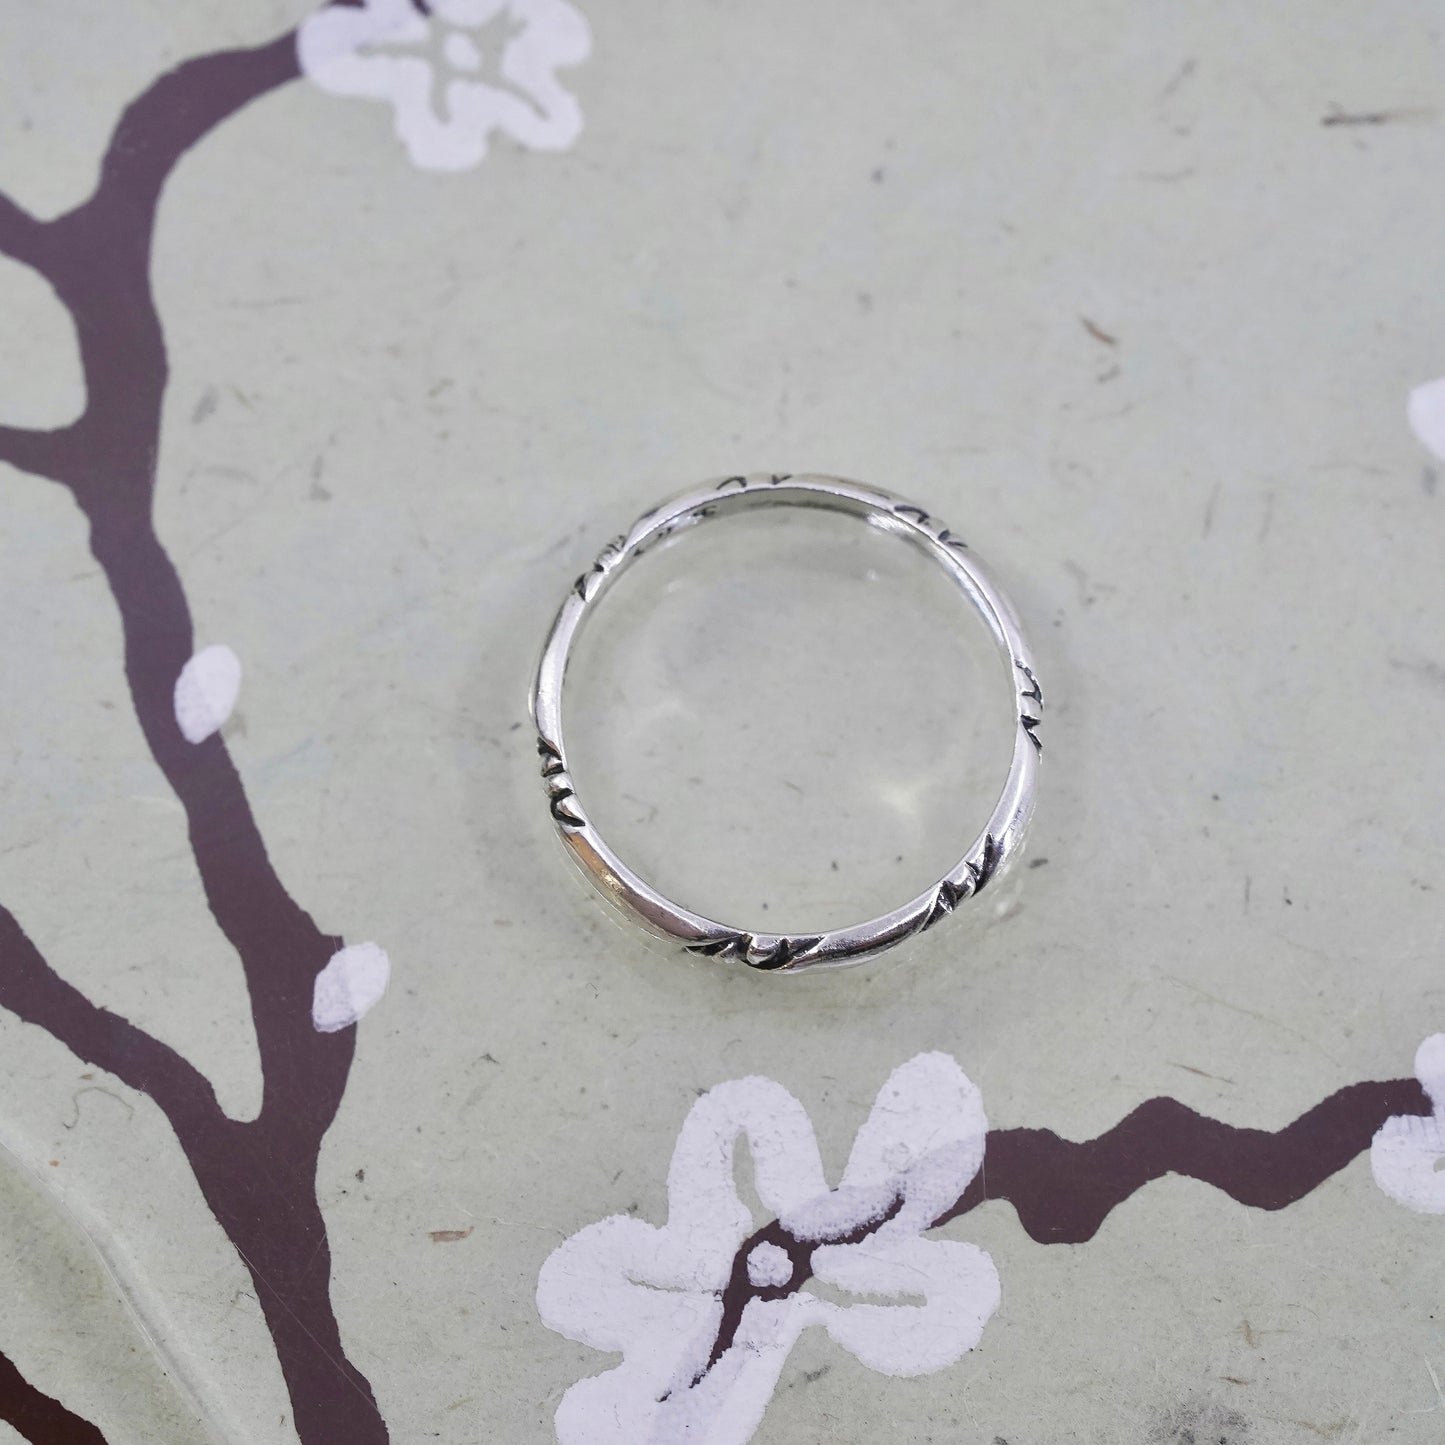 Size 12.25, vintage sterling silver handmade ring, 925 thin stackable band